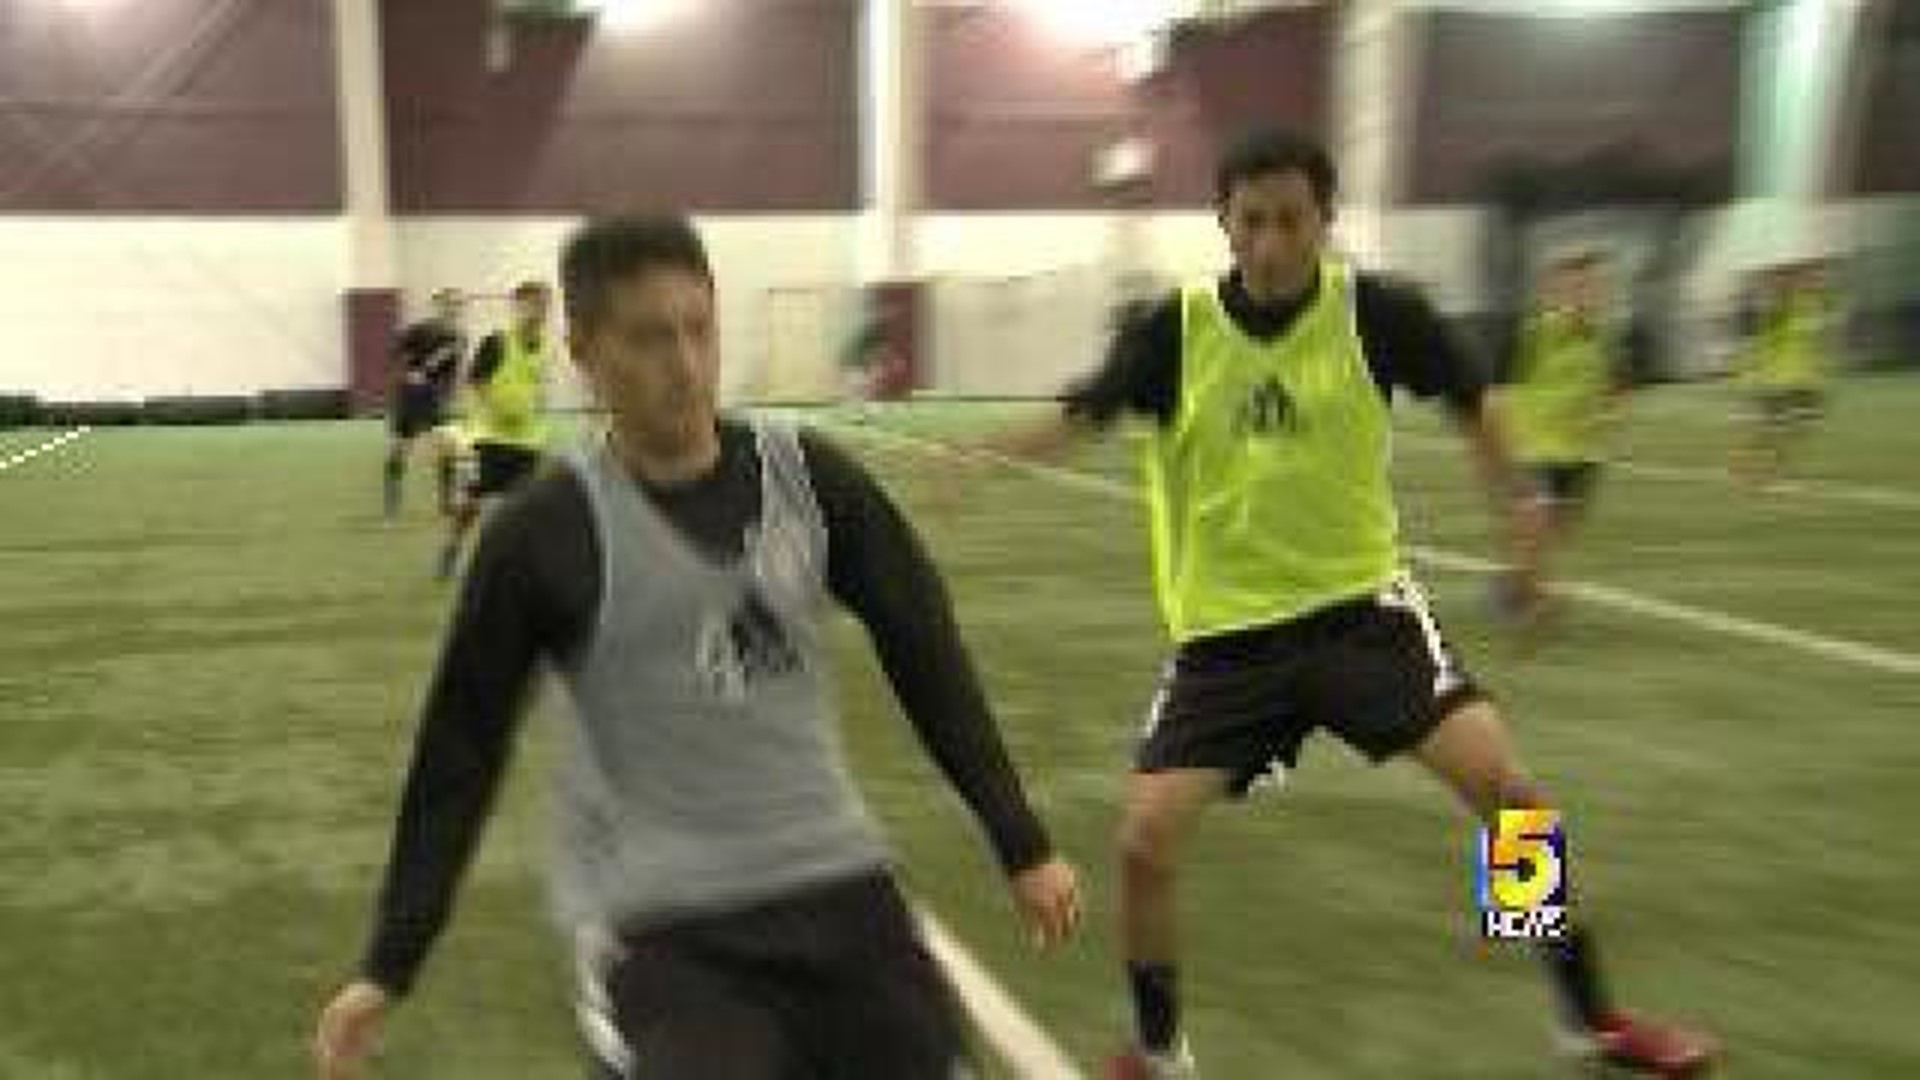 Soccer: Watch out for collisions!